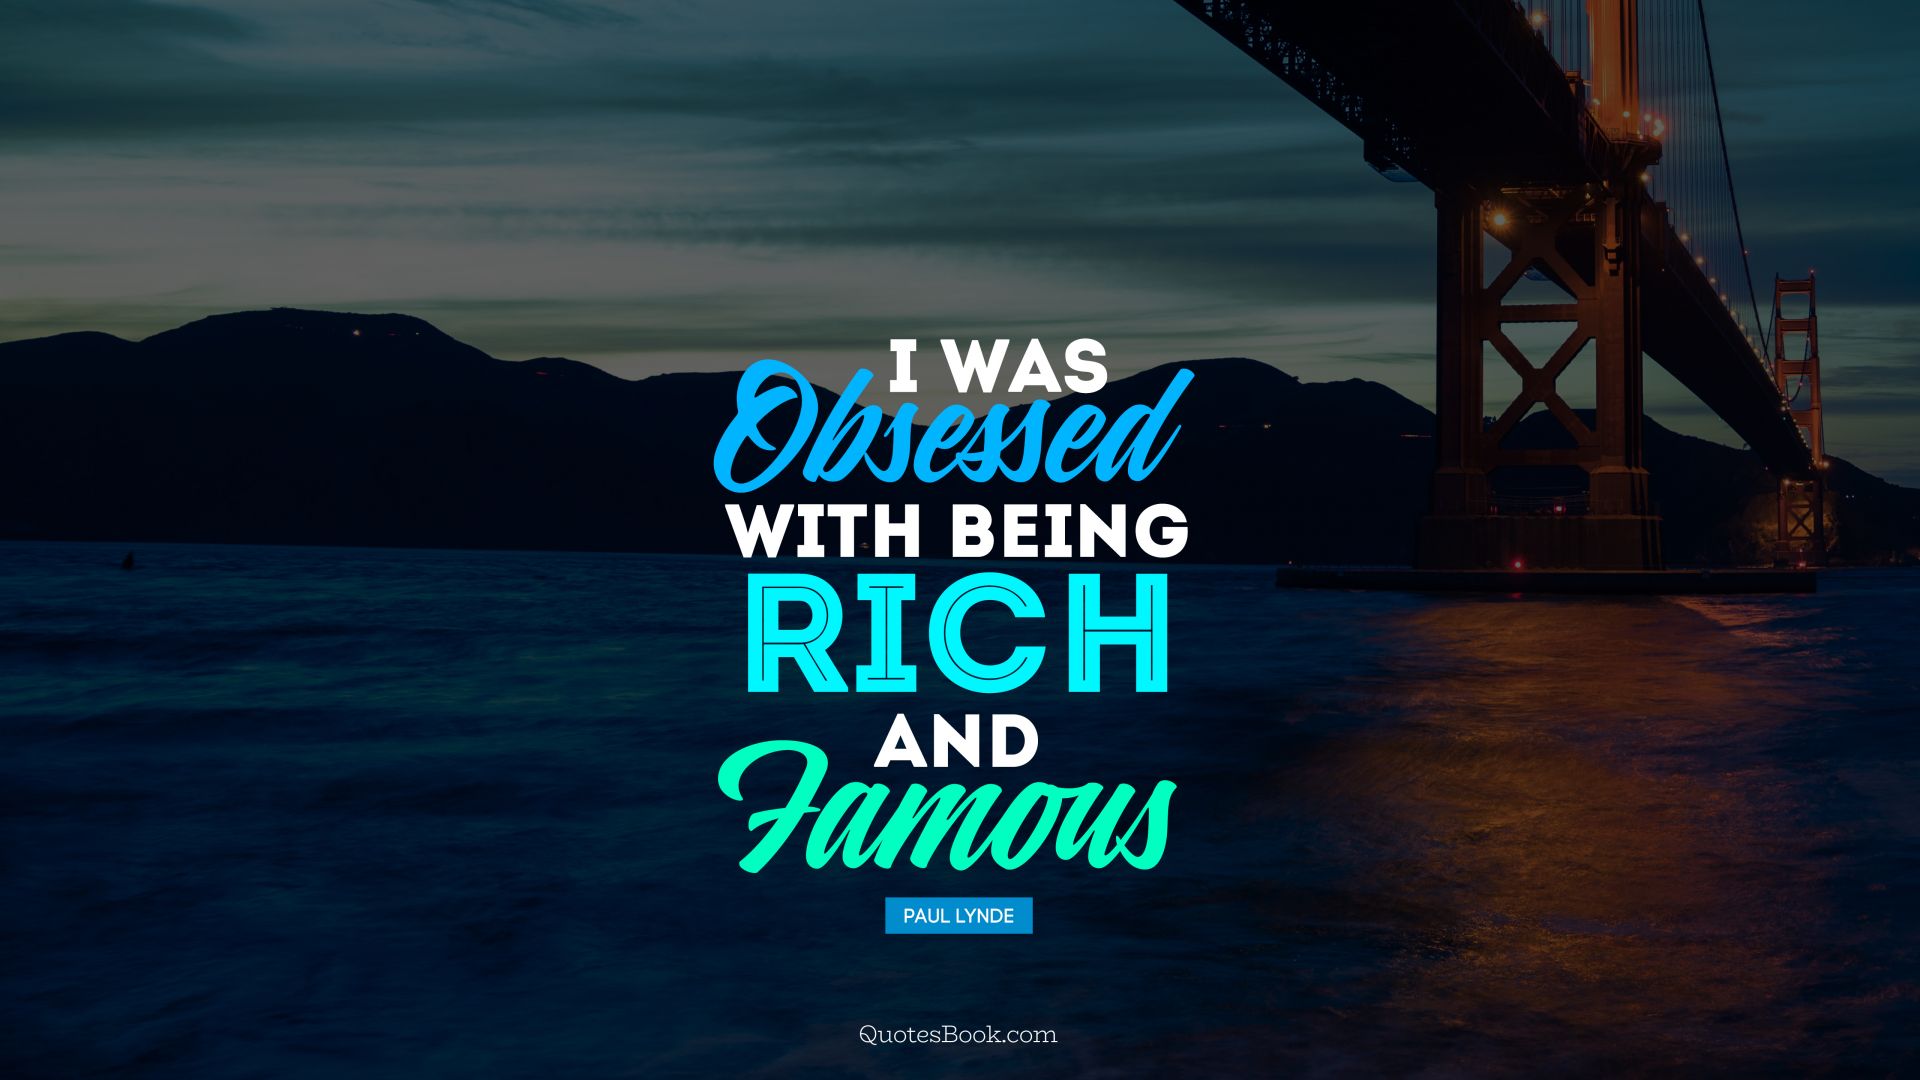 I was obsessed with being rich and famous. - Quote by Paul Lynde